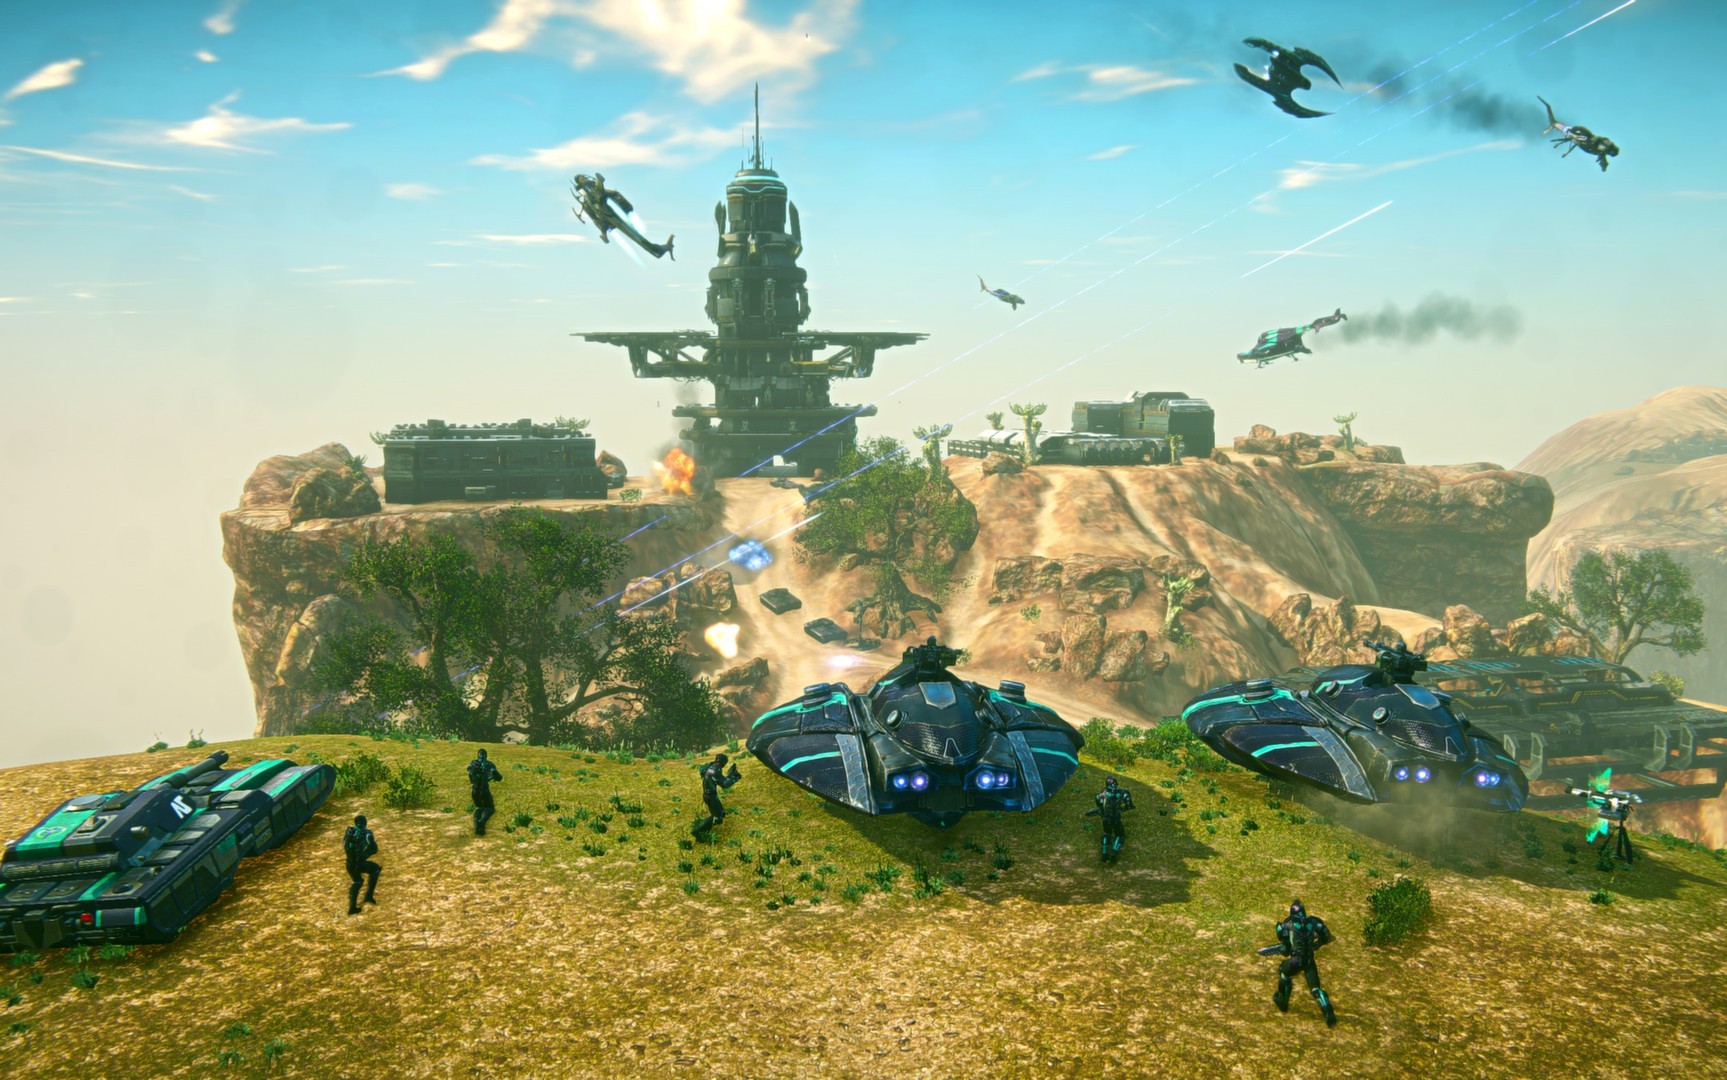 Planetside 2 Runs At A Solid 30fps On Ps4 Sony Confirms